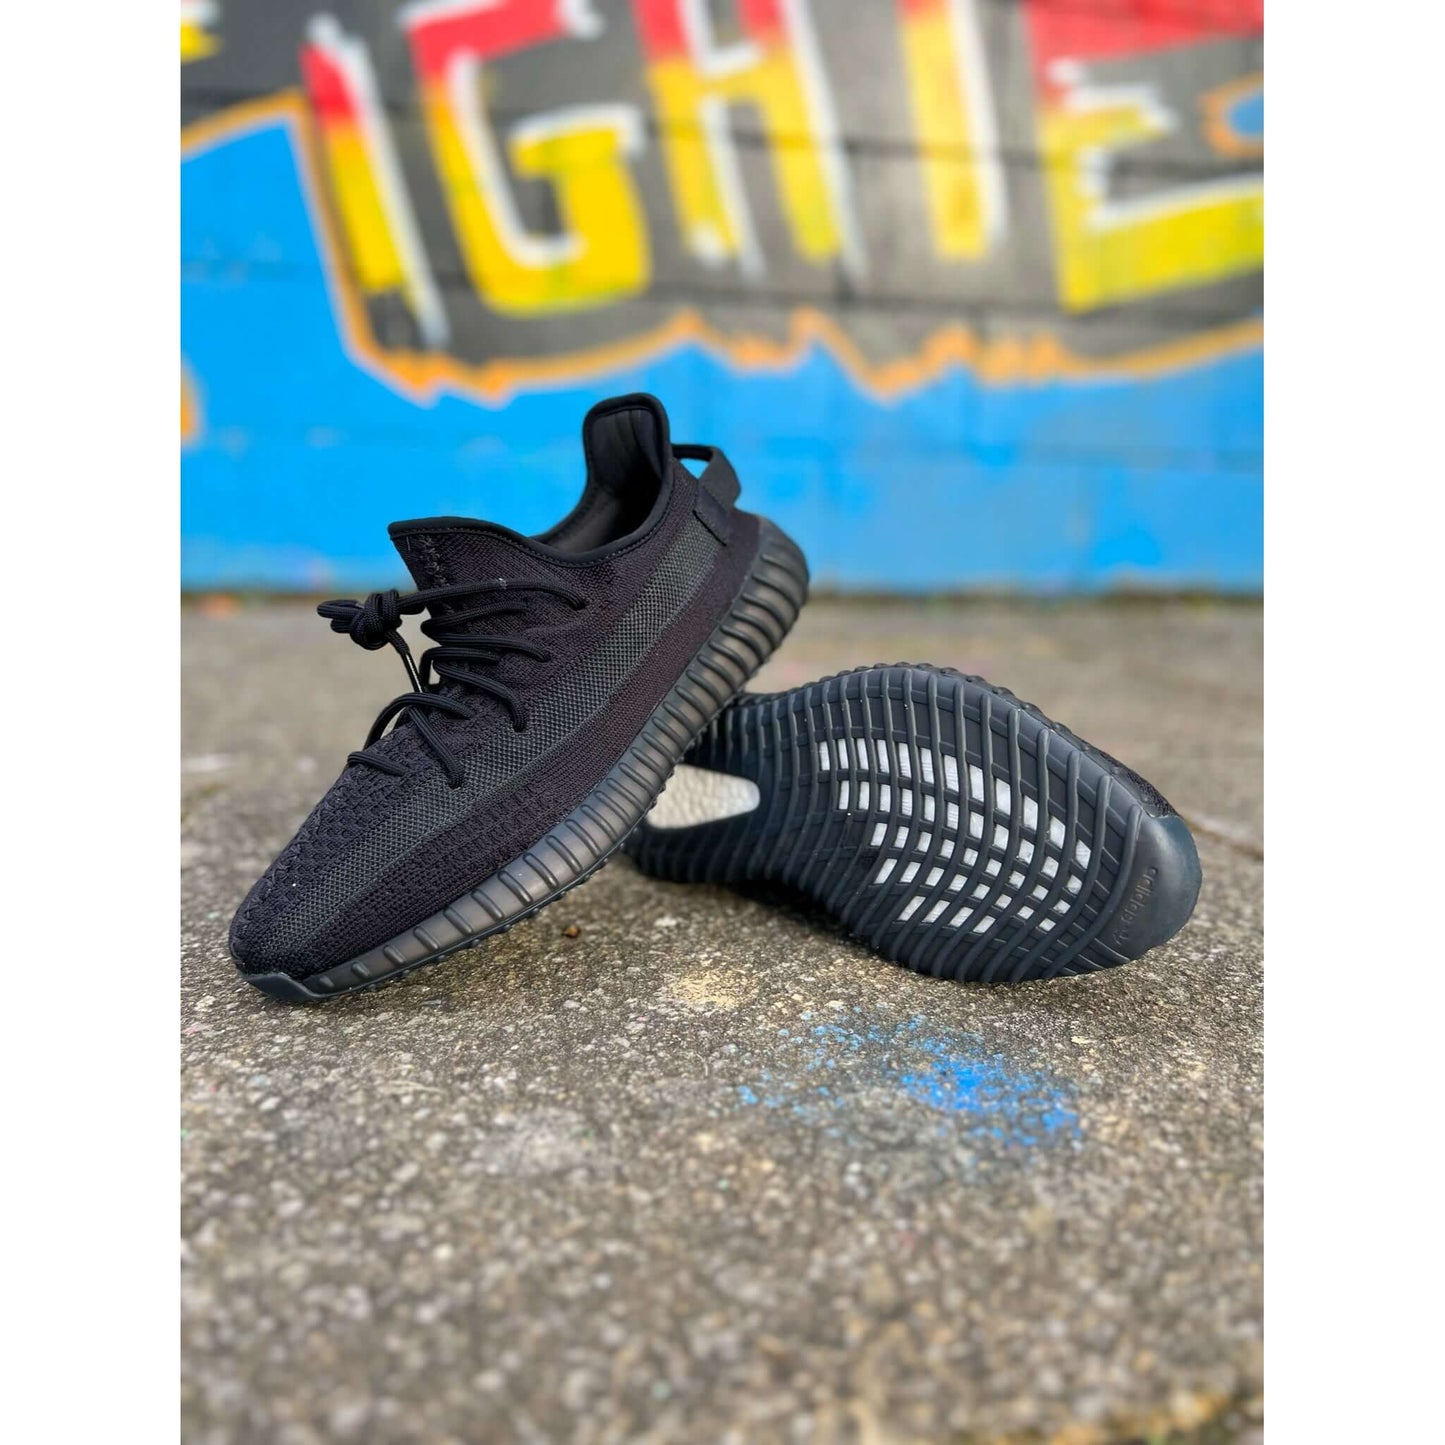 Adidas Yeezy Boost 350 V2 Onyx by Yeezy from £281.00